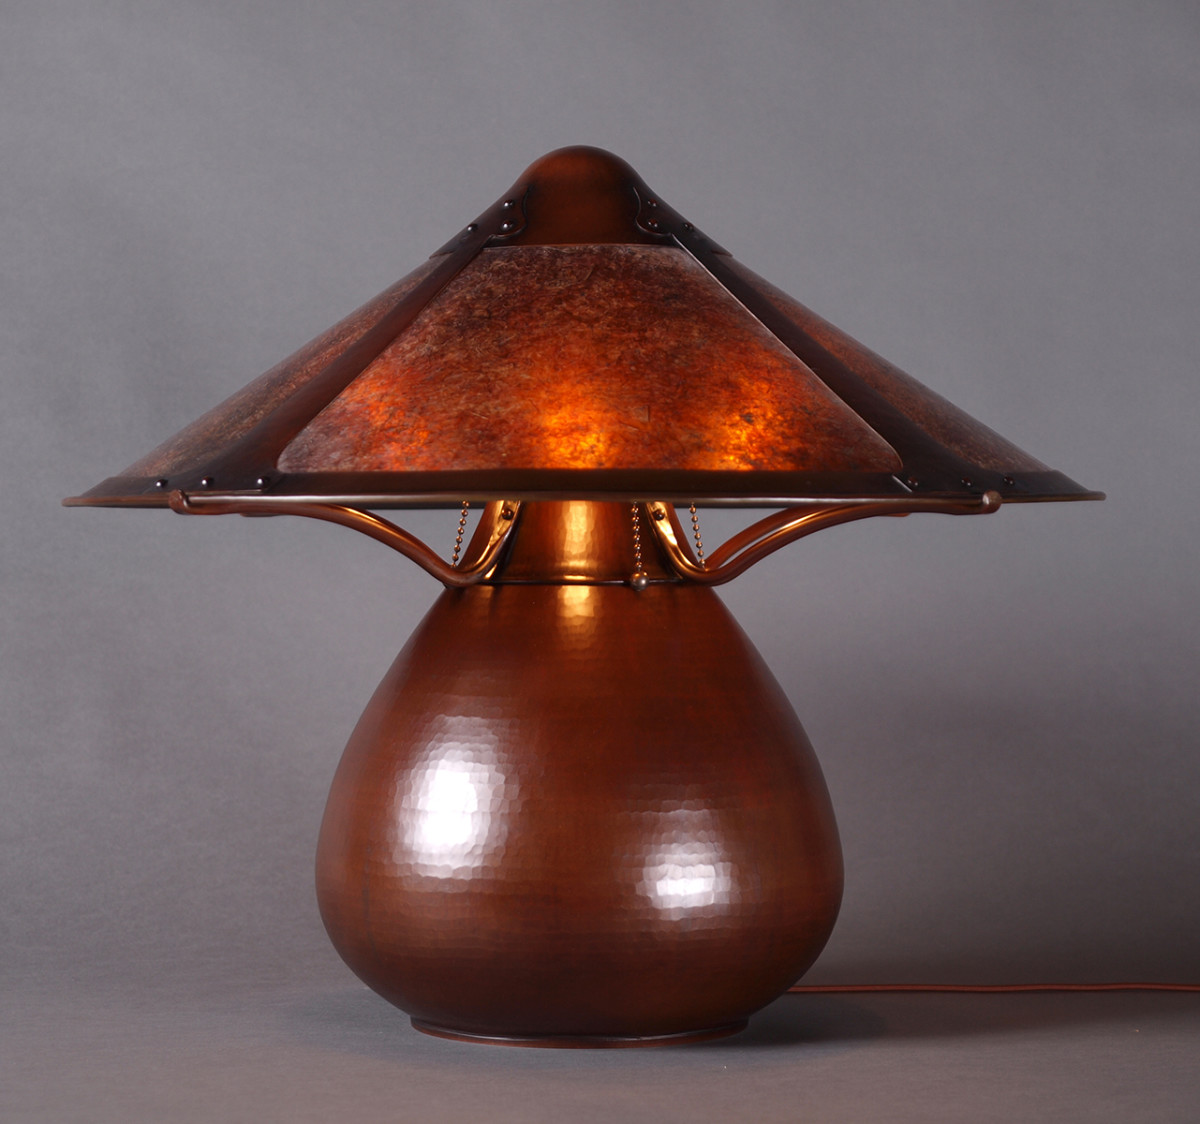 A Revival Of Art Lamps Design For The, Antique Arts And Crafts Table Lamps